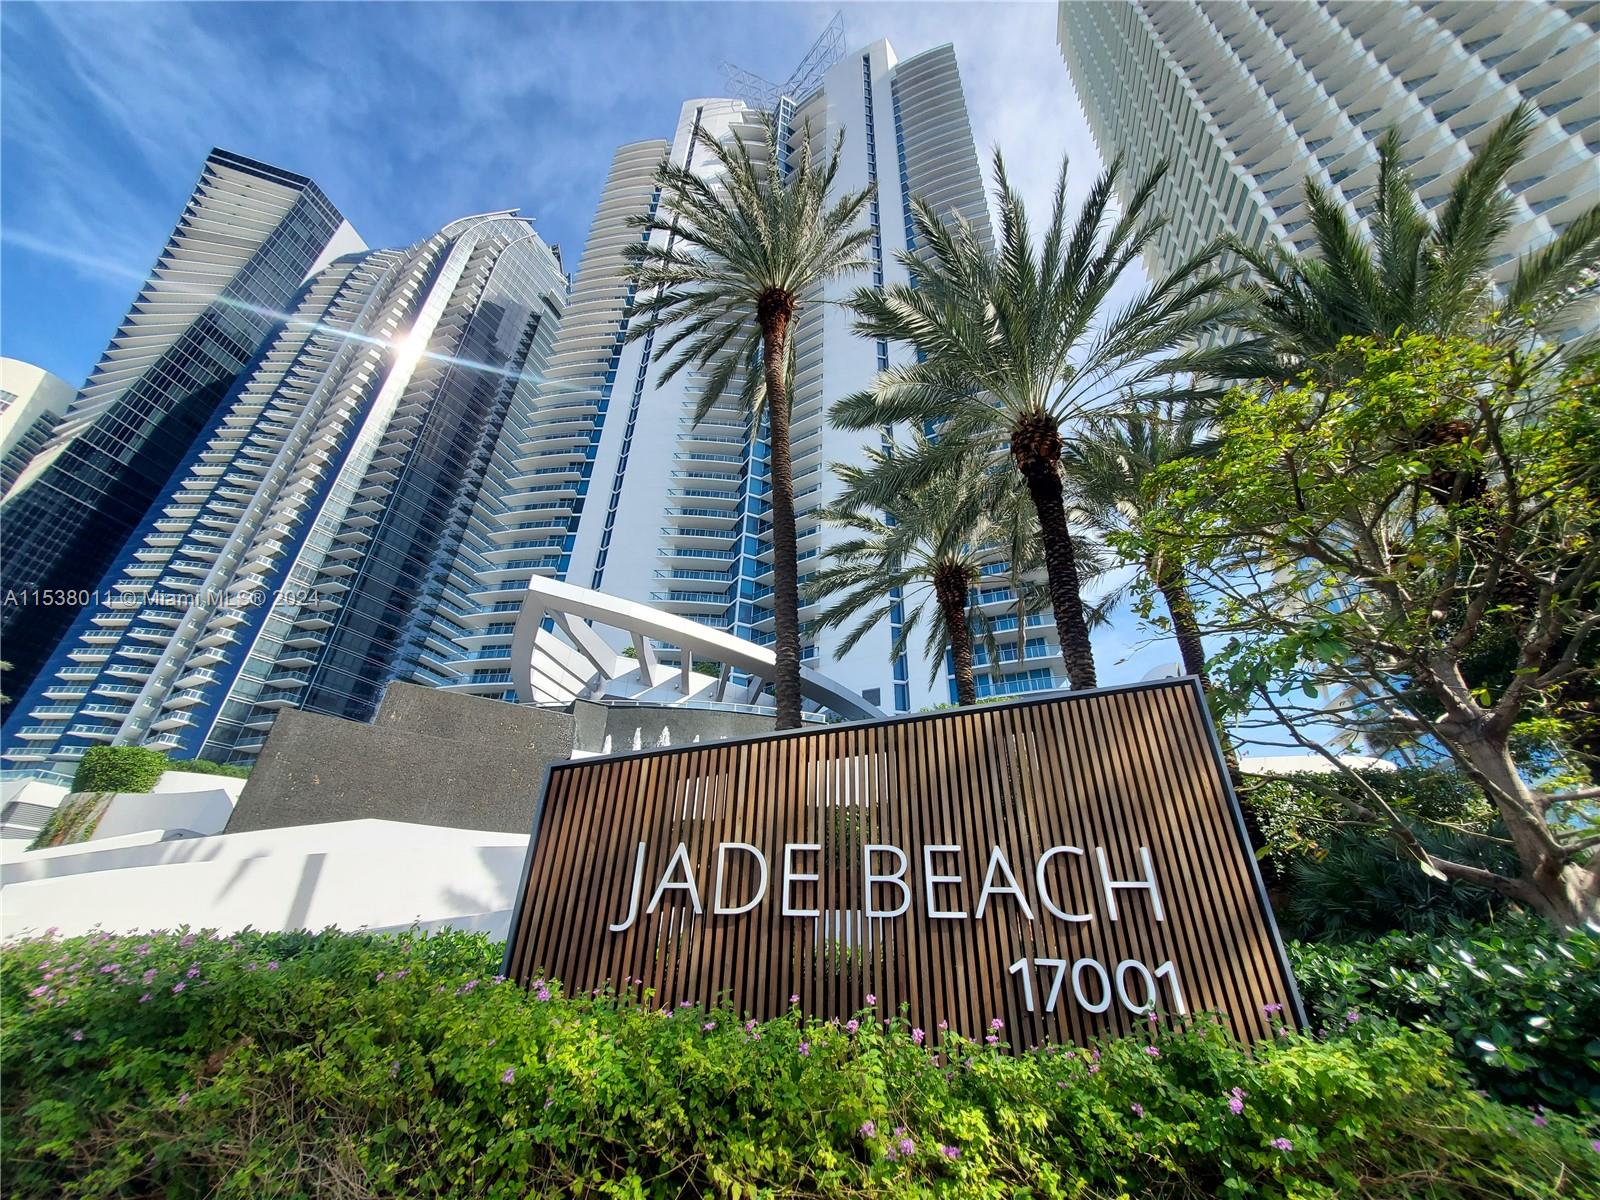 Welcome to the largest single-story 4 bed. 5.5 bath condo at Jade Beach. This bright and spacious flow though unit, has expansive balconies with mesmerizing Views of the Ocean, Sunrise, Intracoastal, and Sunset. Featuring a kitchen with top of the line miele appliances, subzero refrigerator, coffee maker, and wine cooler. High-end furniture and accessories. Assigned parking space. Amenities to dream about: Sunset + Sunrise Pools, Beach Service, on site cafe, teen and children playrooms, Fitness Center, Sauna, Steam room, massage and treatment rooms, concierge, business center. Across from the supermarket, restaurants, Starbucks, and more. Close distance from Bal Harbor Shops and Aventura Mall. Available for minimum of 6 months or more.